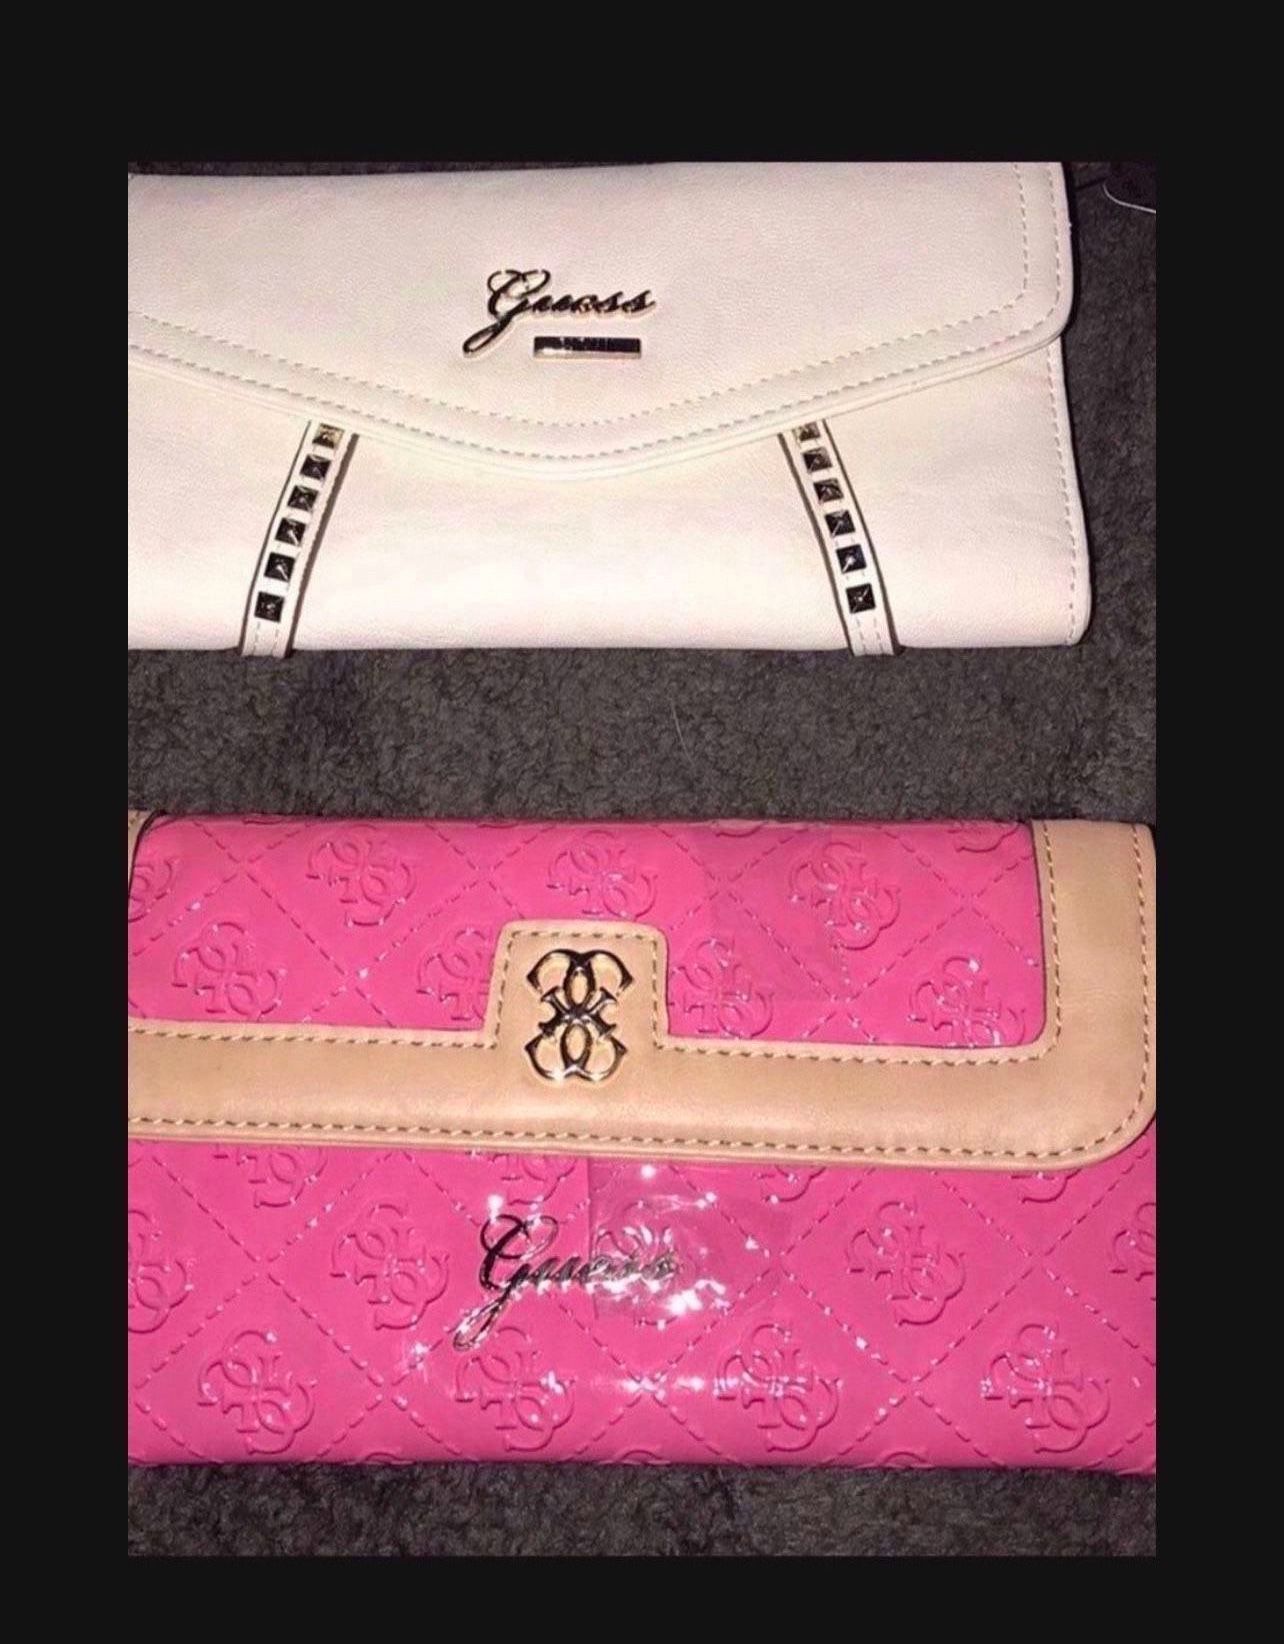 Guess Wallets 20.00 Each 